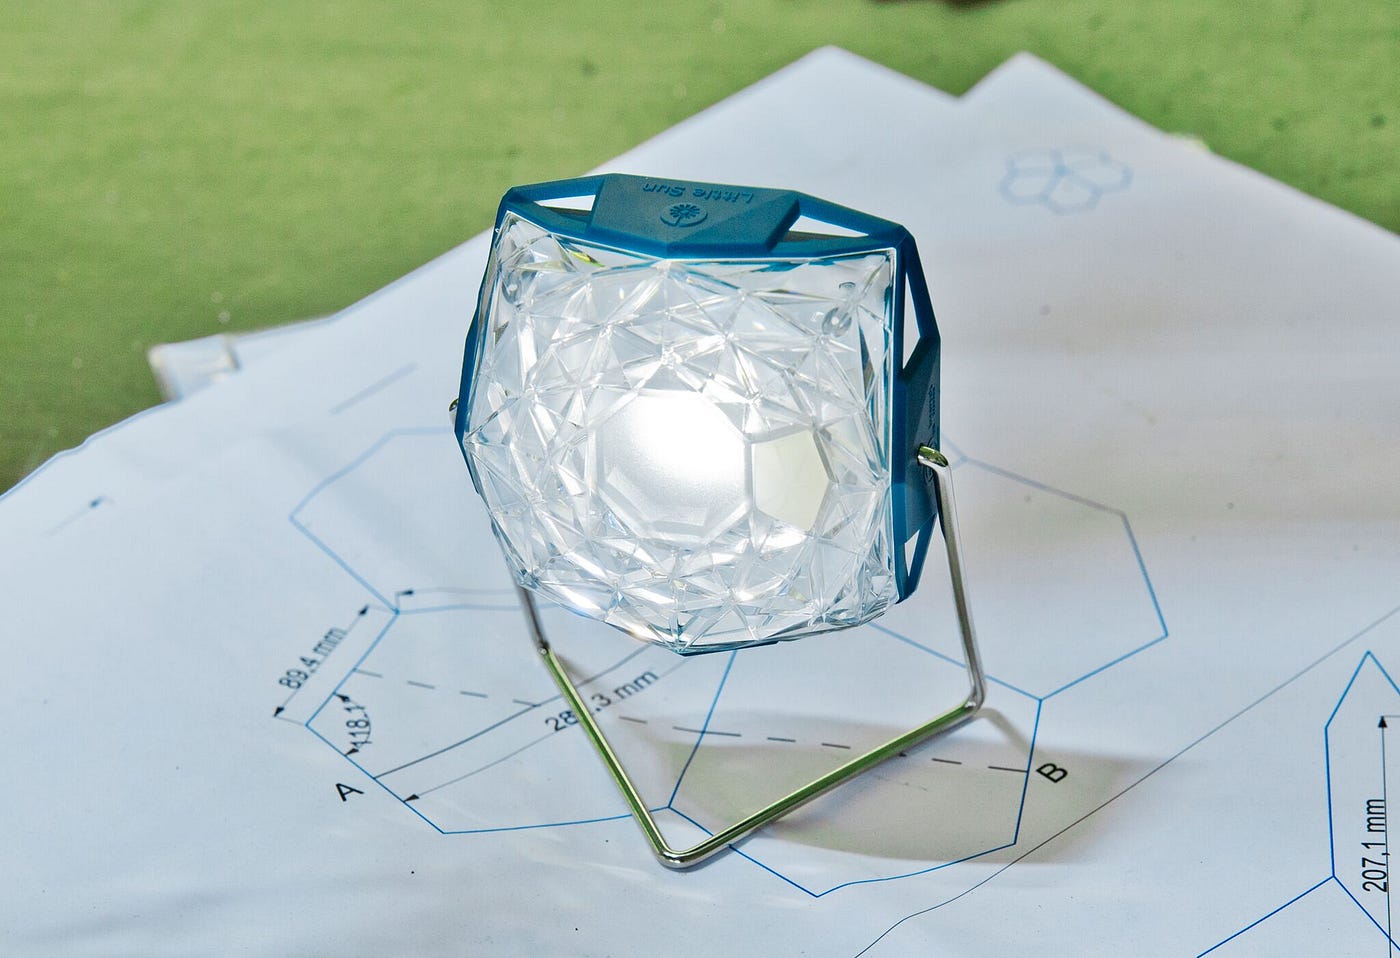 Little Sun releases a new solar lamp designed by Olafur Eliasson | by The  Beam | TheBeamMagazine | Medium